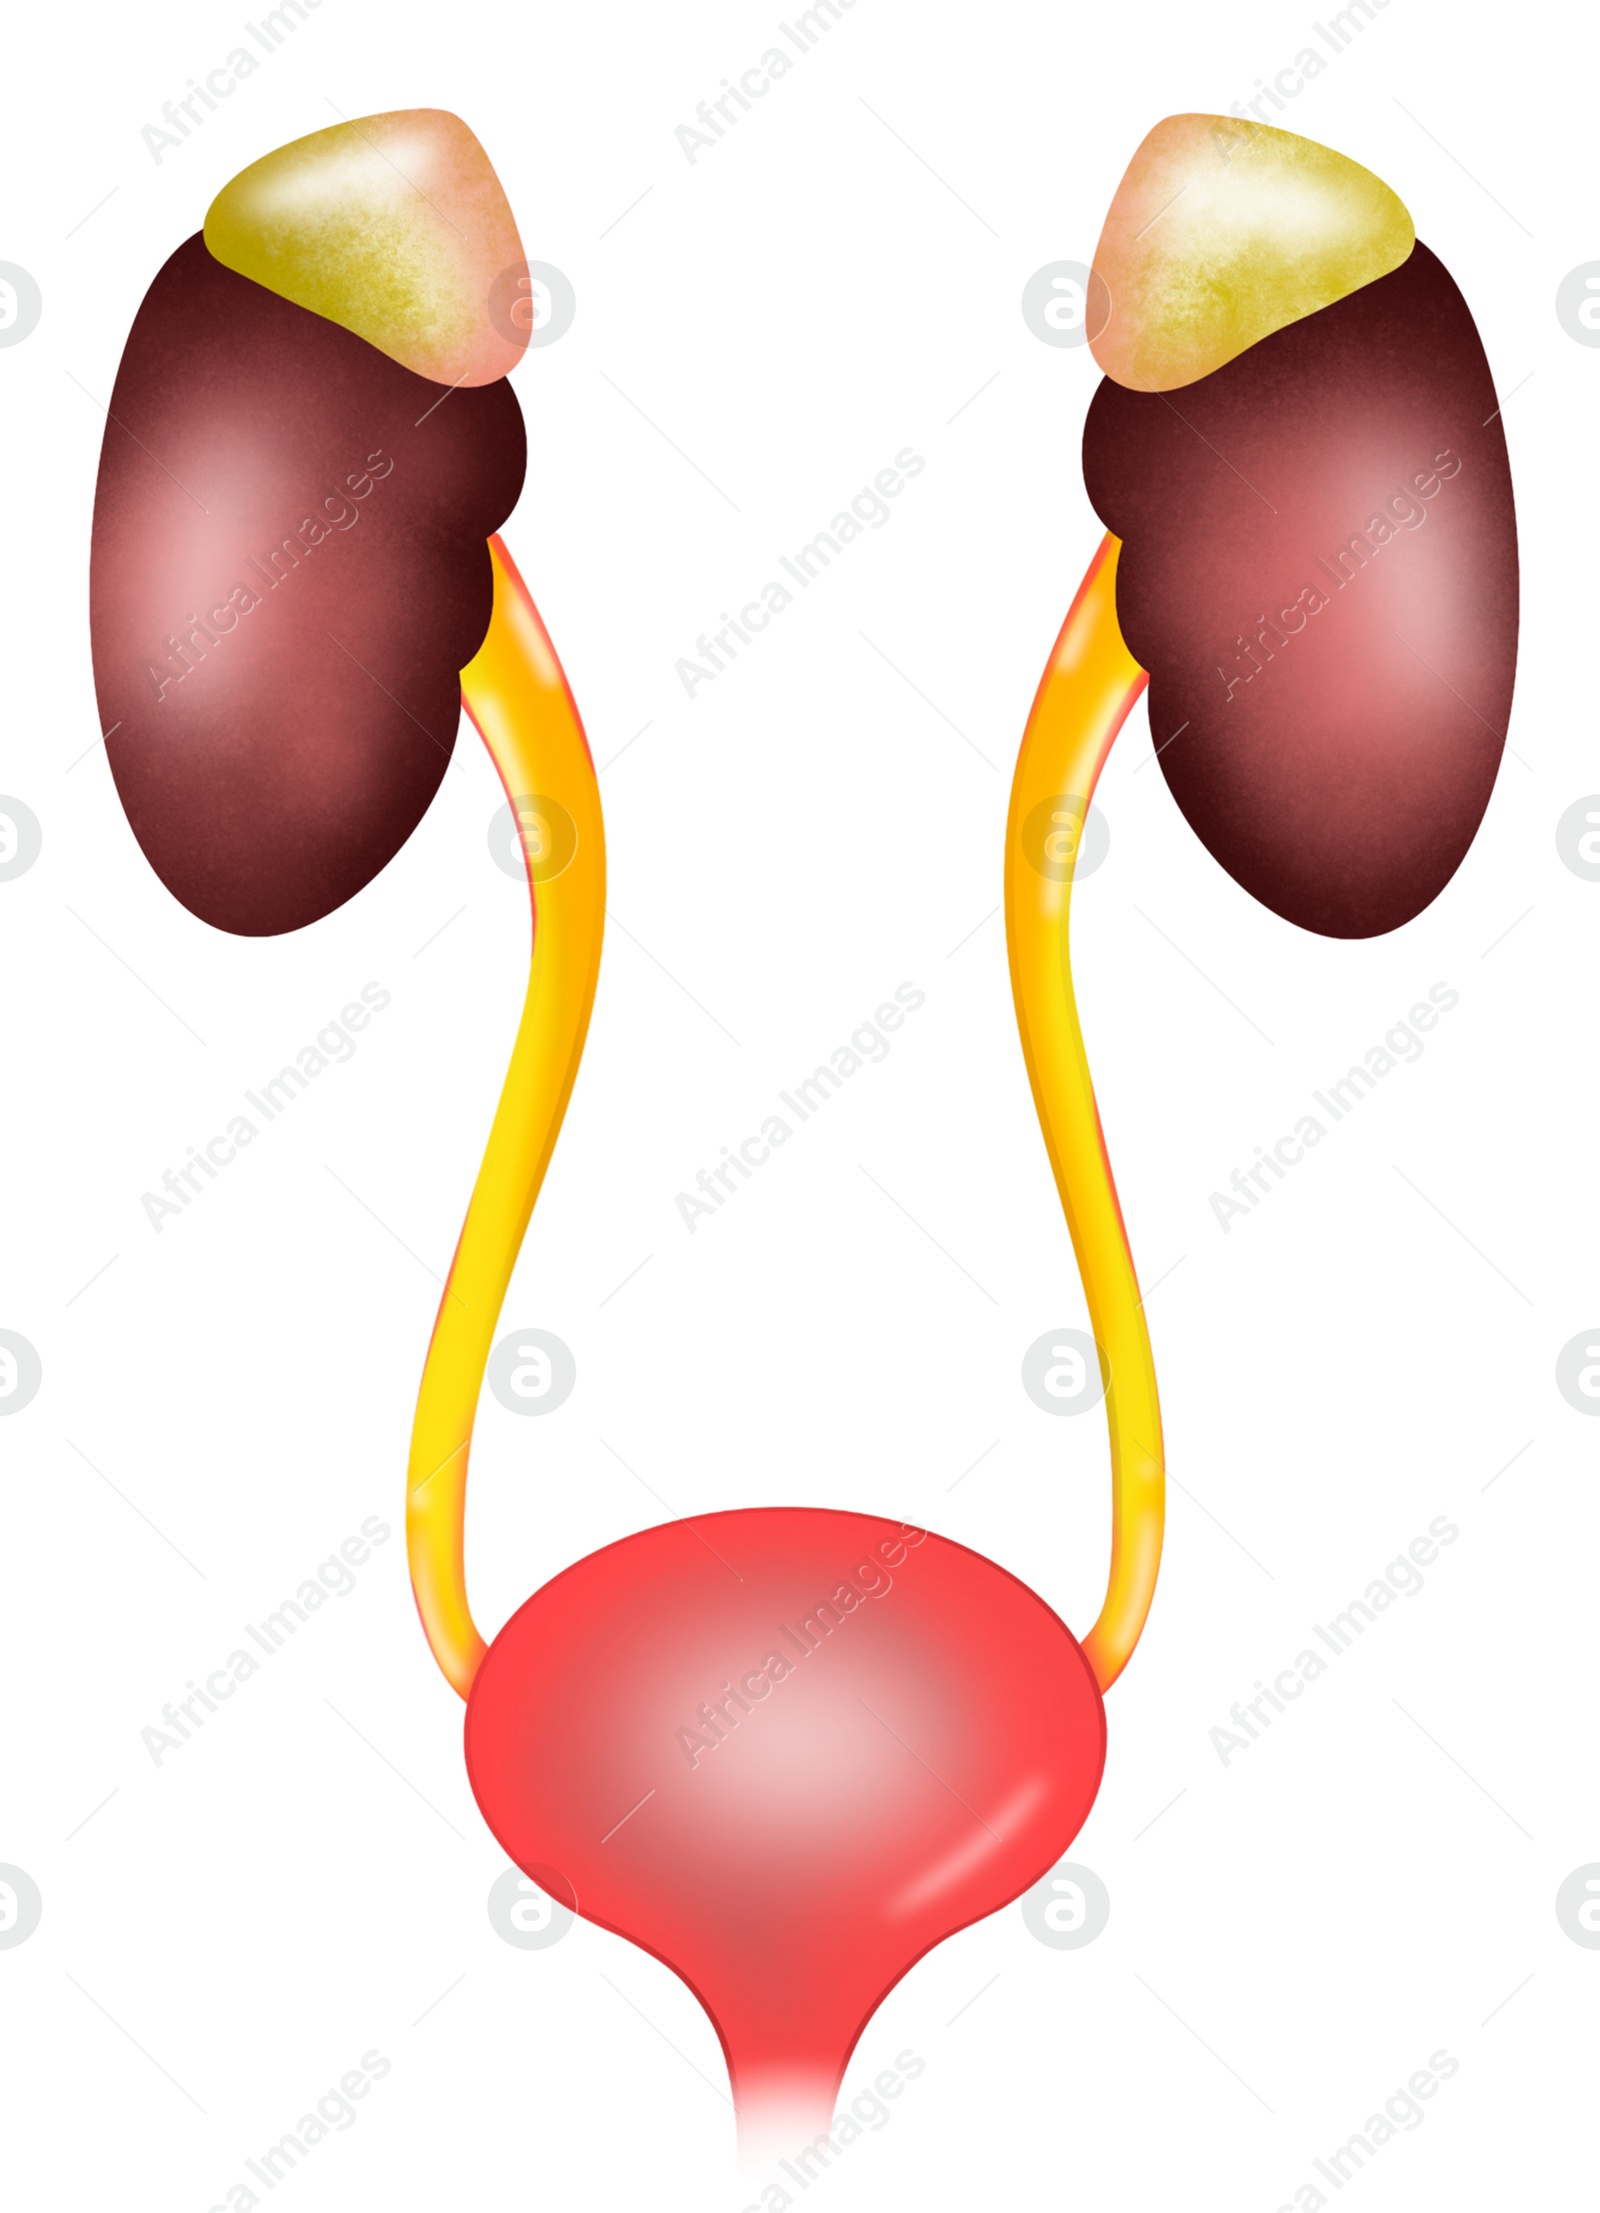 Illustration of  kidneys and urinary system on white background. Human anatomy